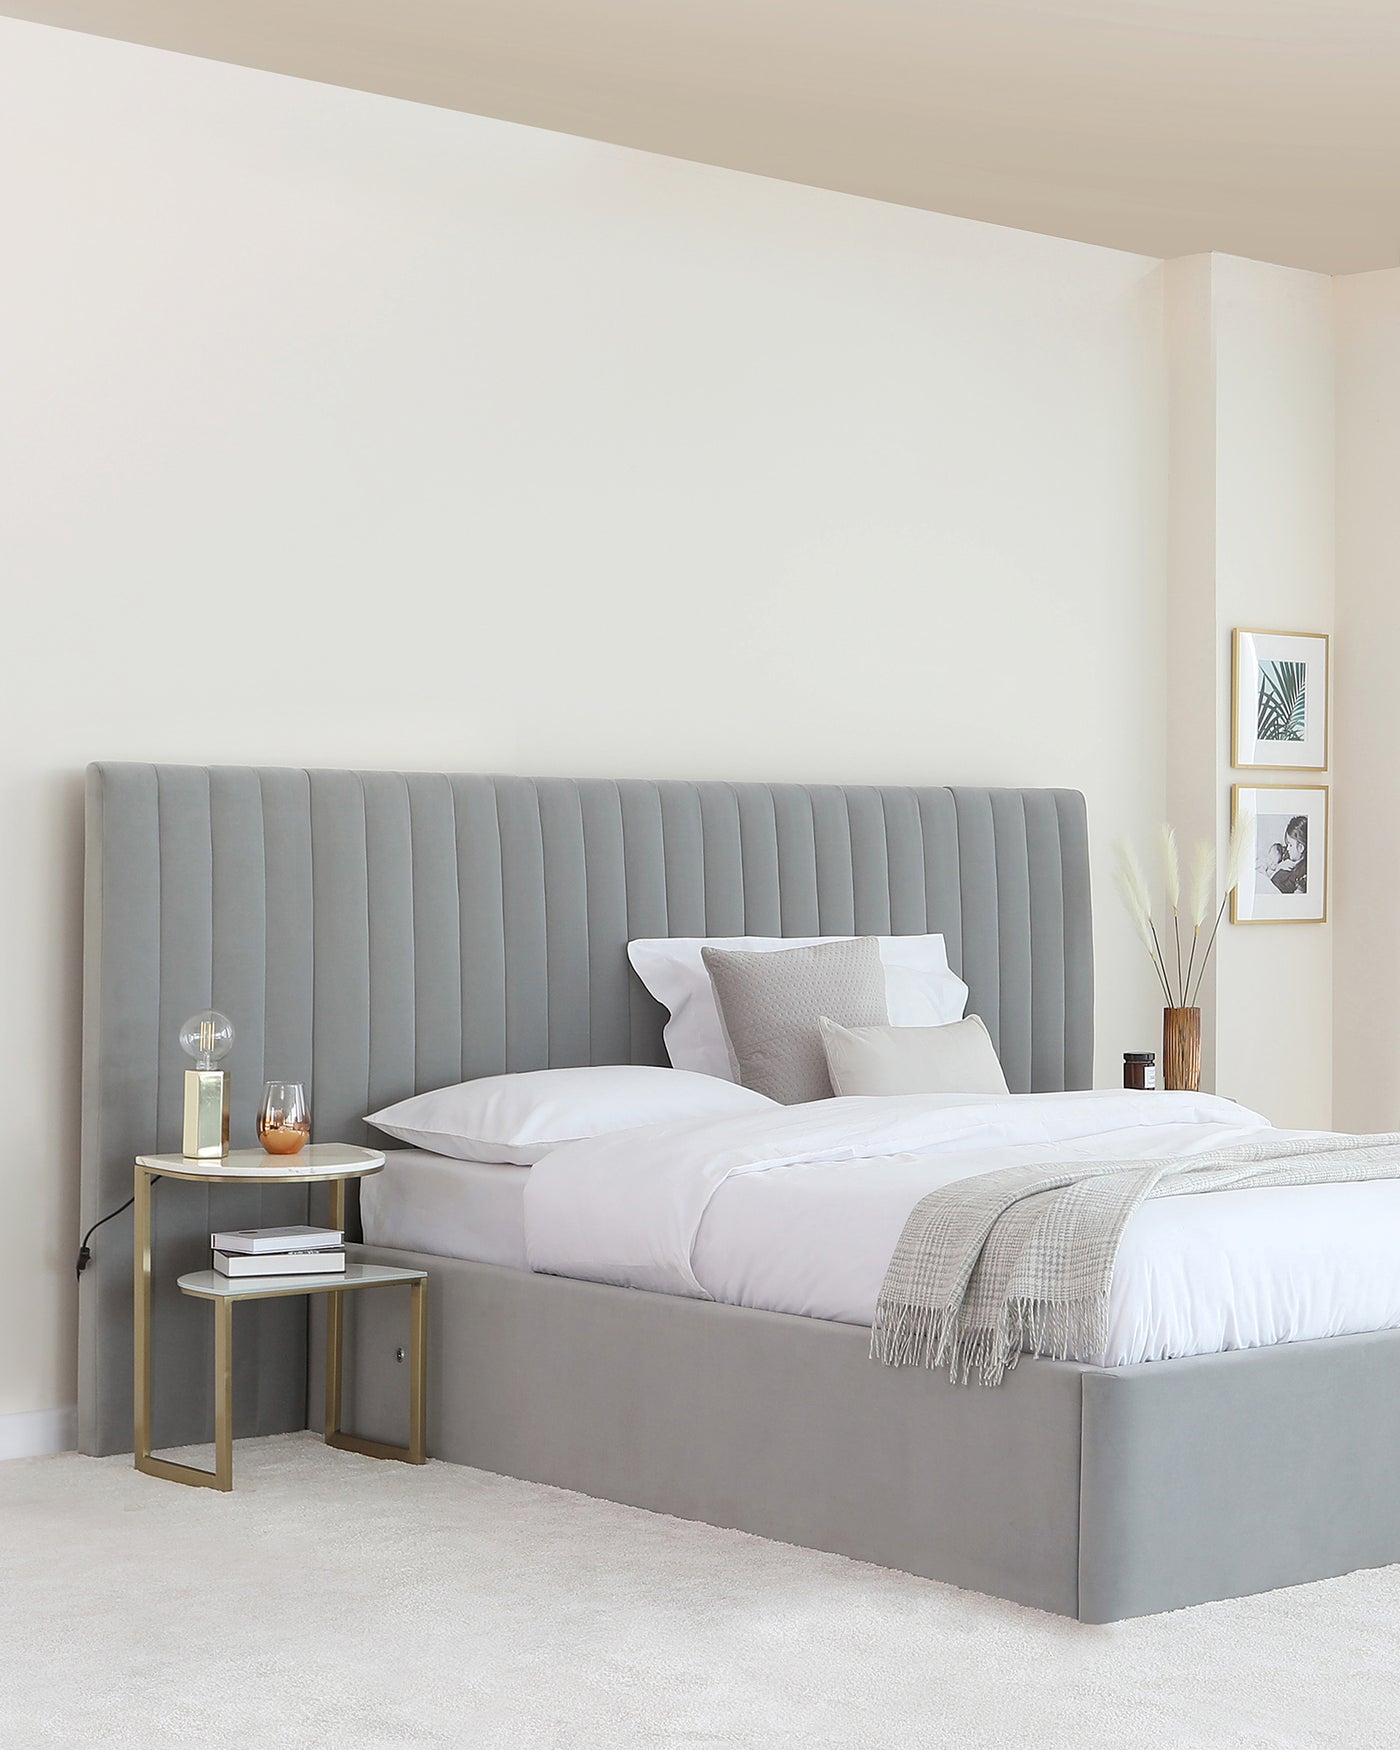 Modern grey upholstered platform bed with an extended vertical channel-tufted headboard and a matching bed frame. Beside it is a two-tiered circular gold and grey side table. The setting is complemented by a neutral colour palette and minimalistic accessories.